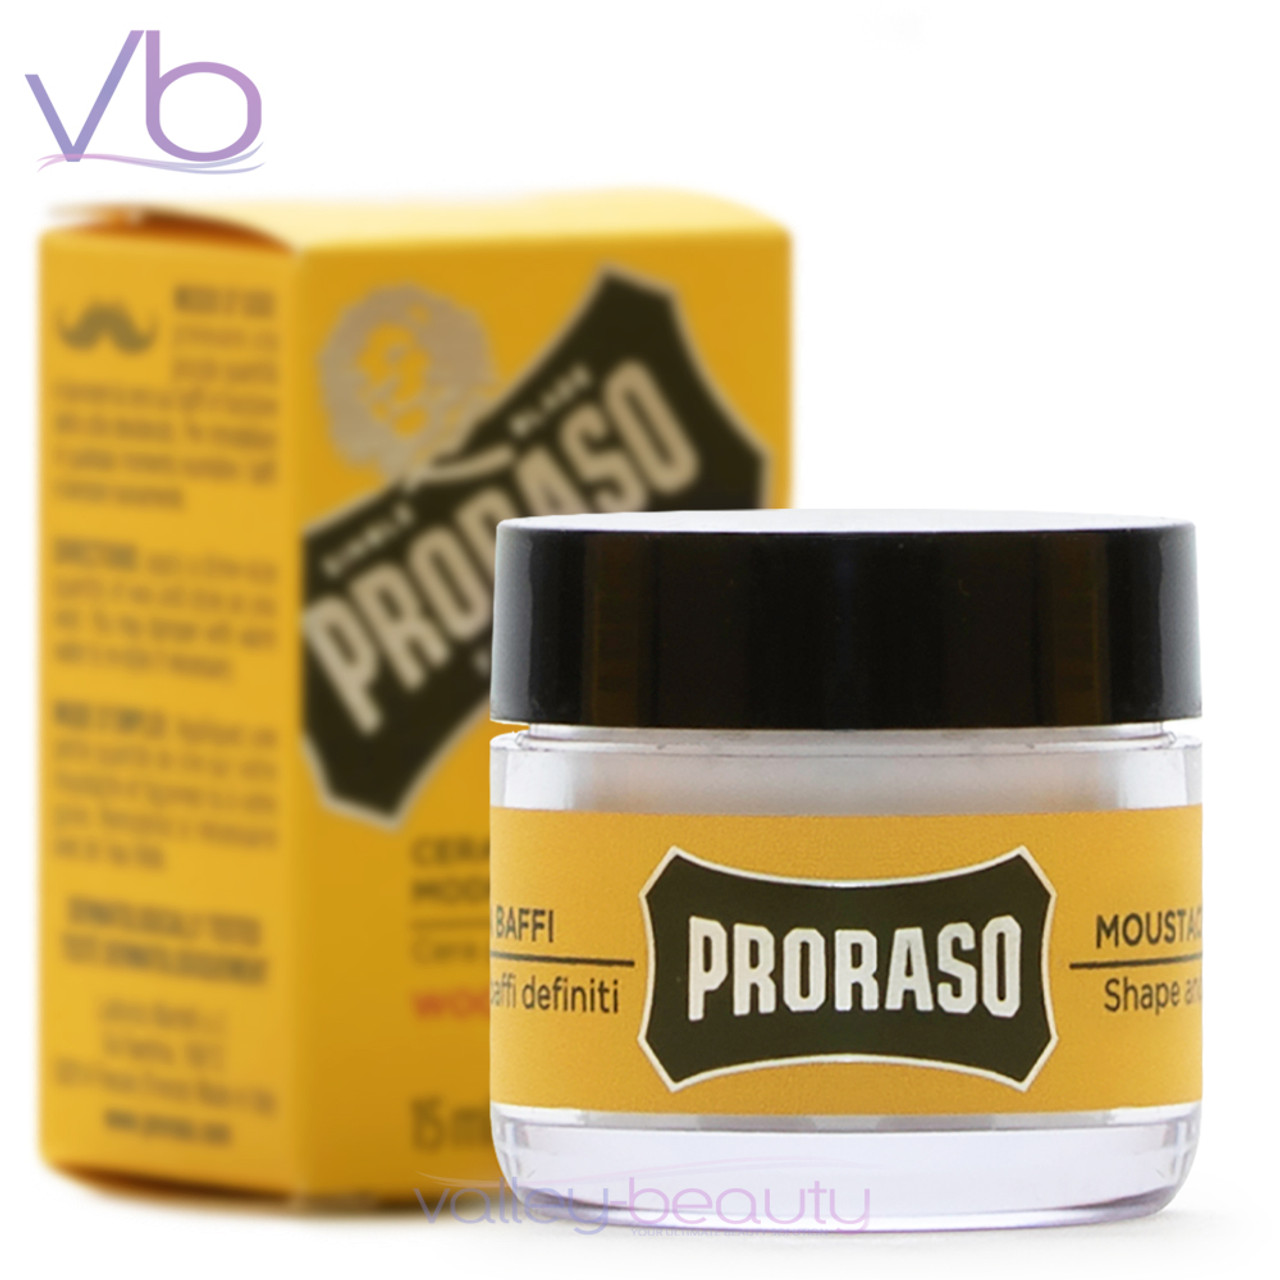 Proraso Single Blade Wood and Spice Moustache Wax, 15ml